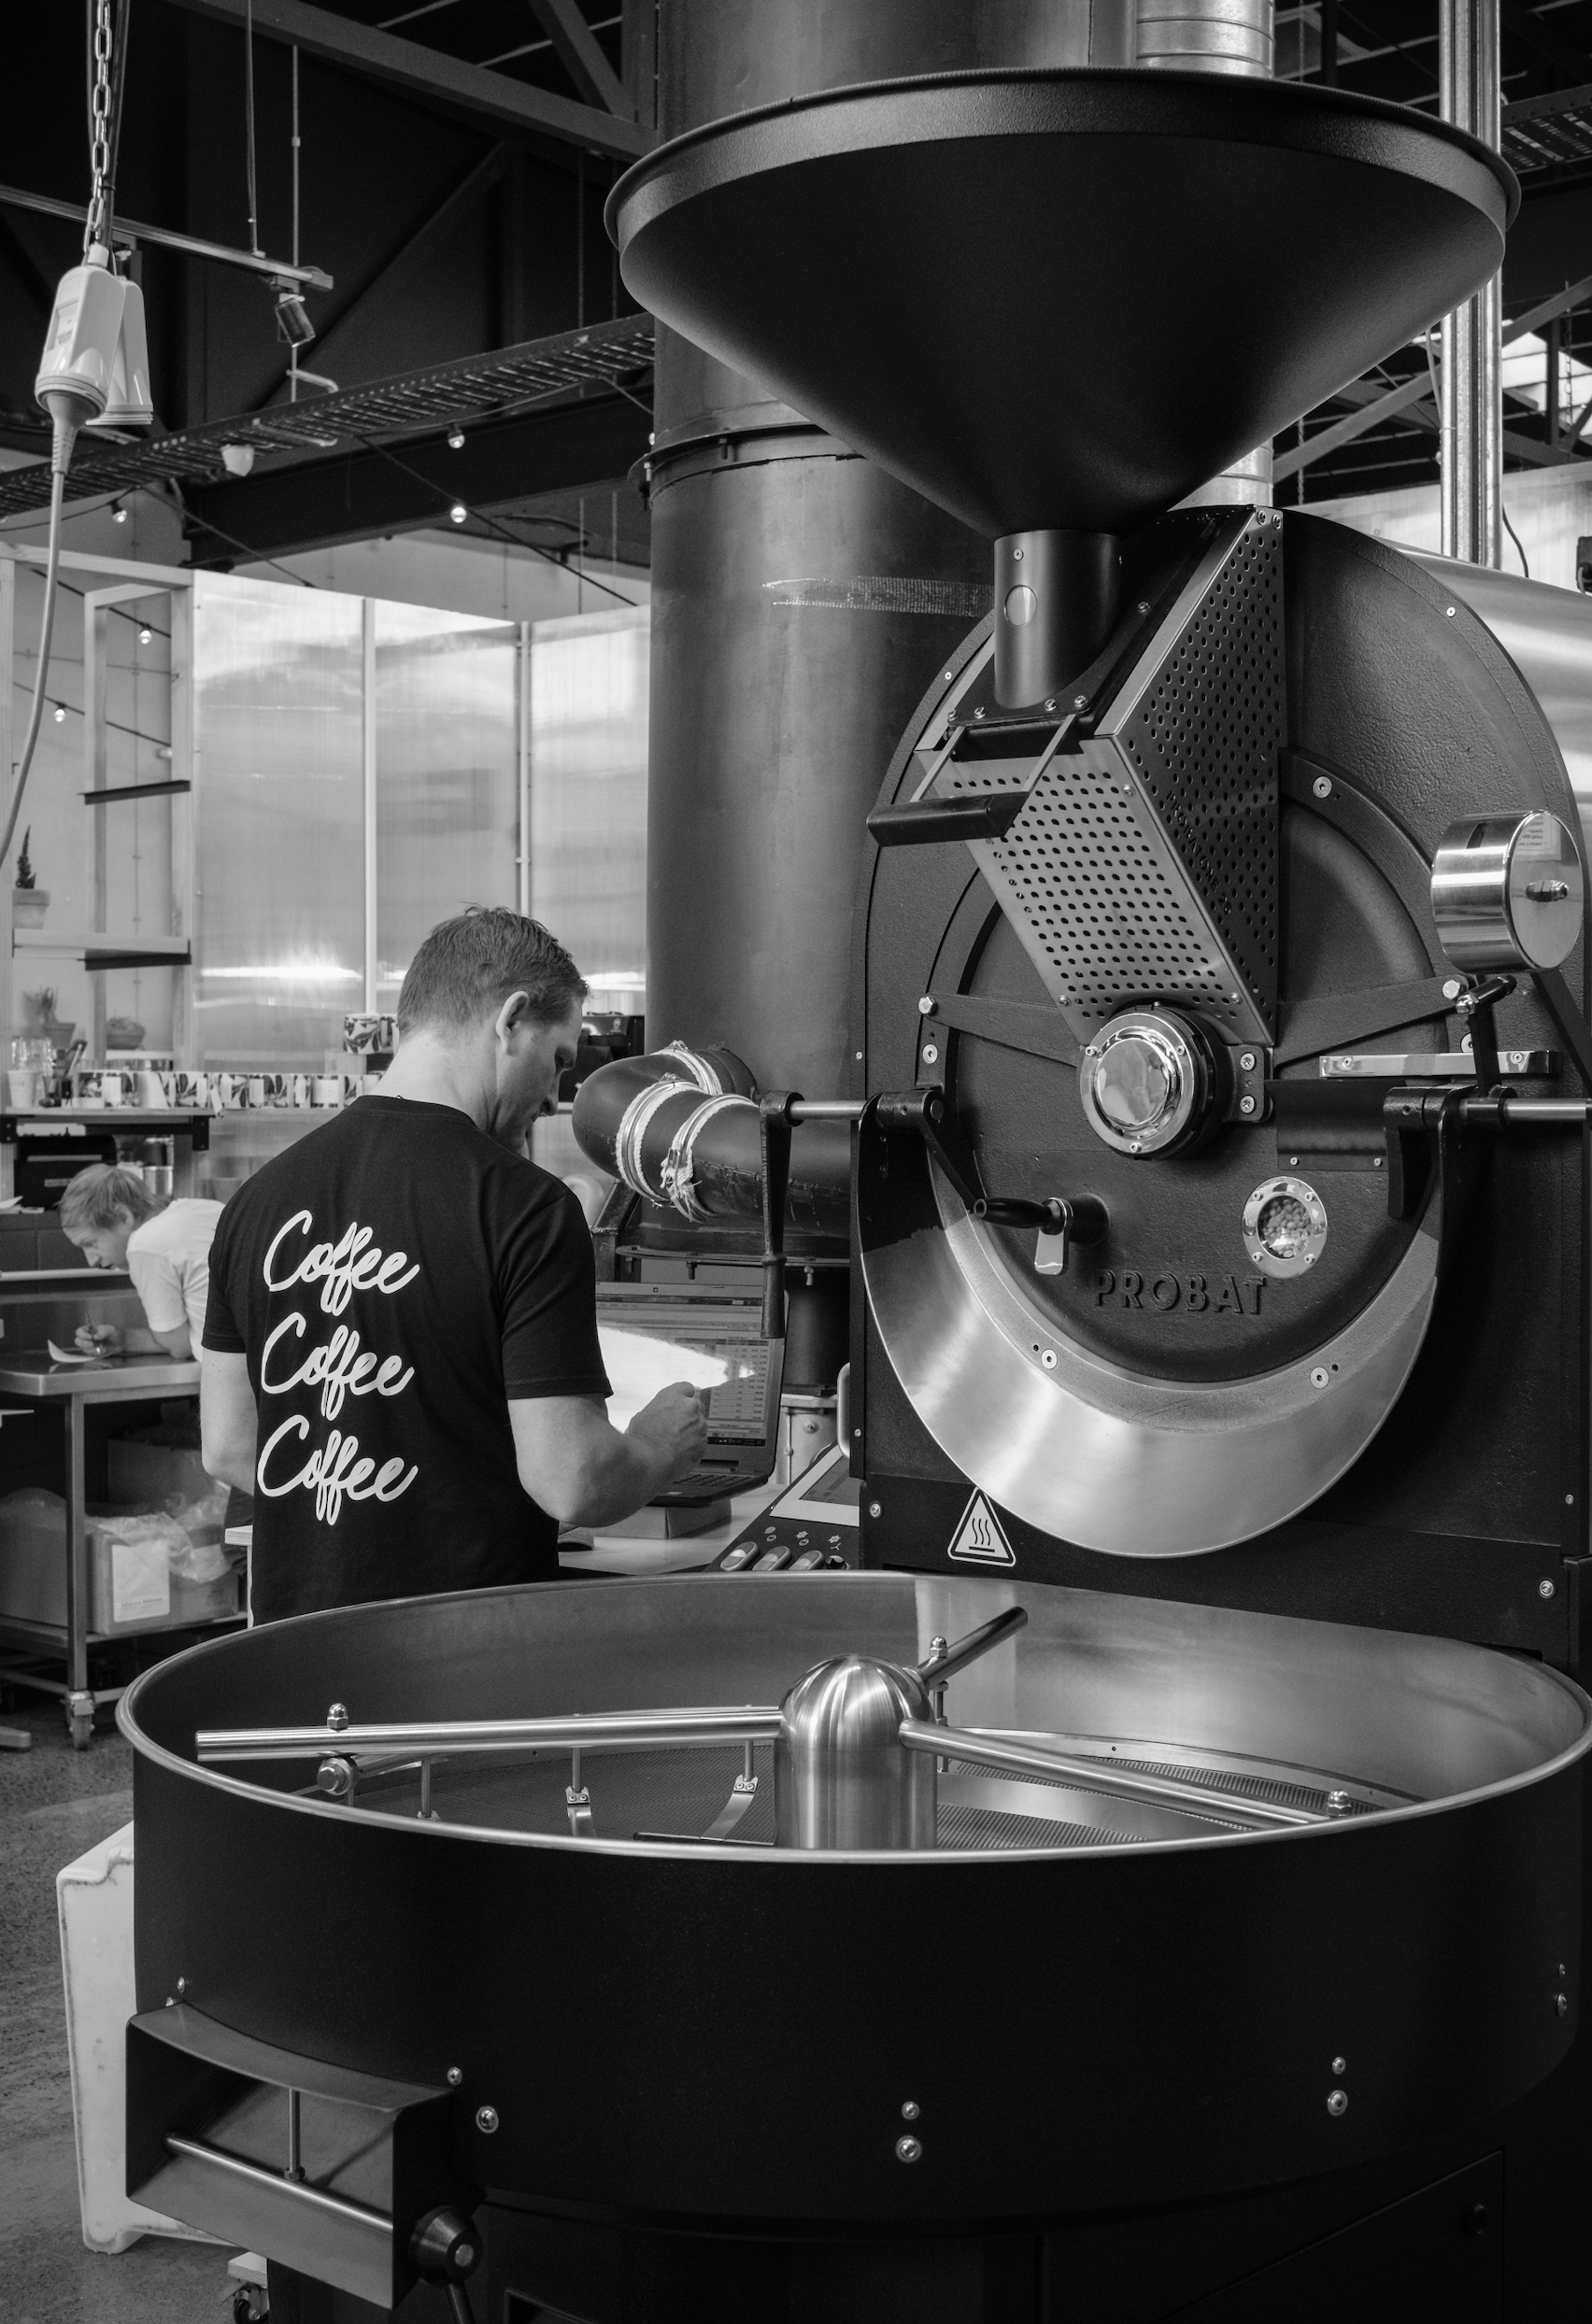 Black and white image of a large coffee roasting drum with head roaster Andy standing next to the machine, his back to the camera